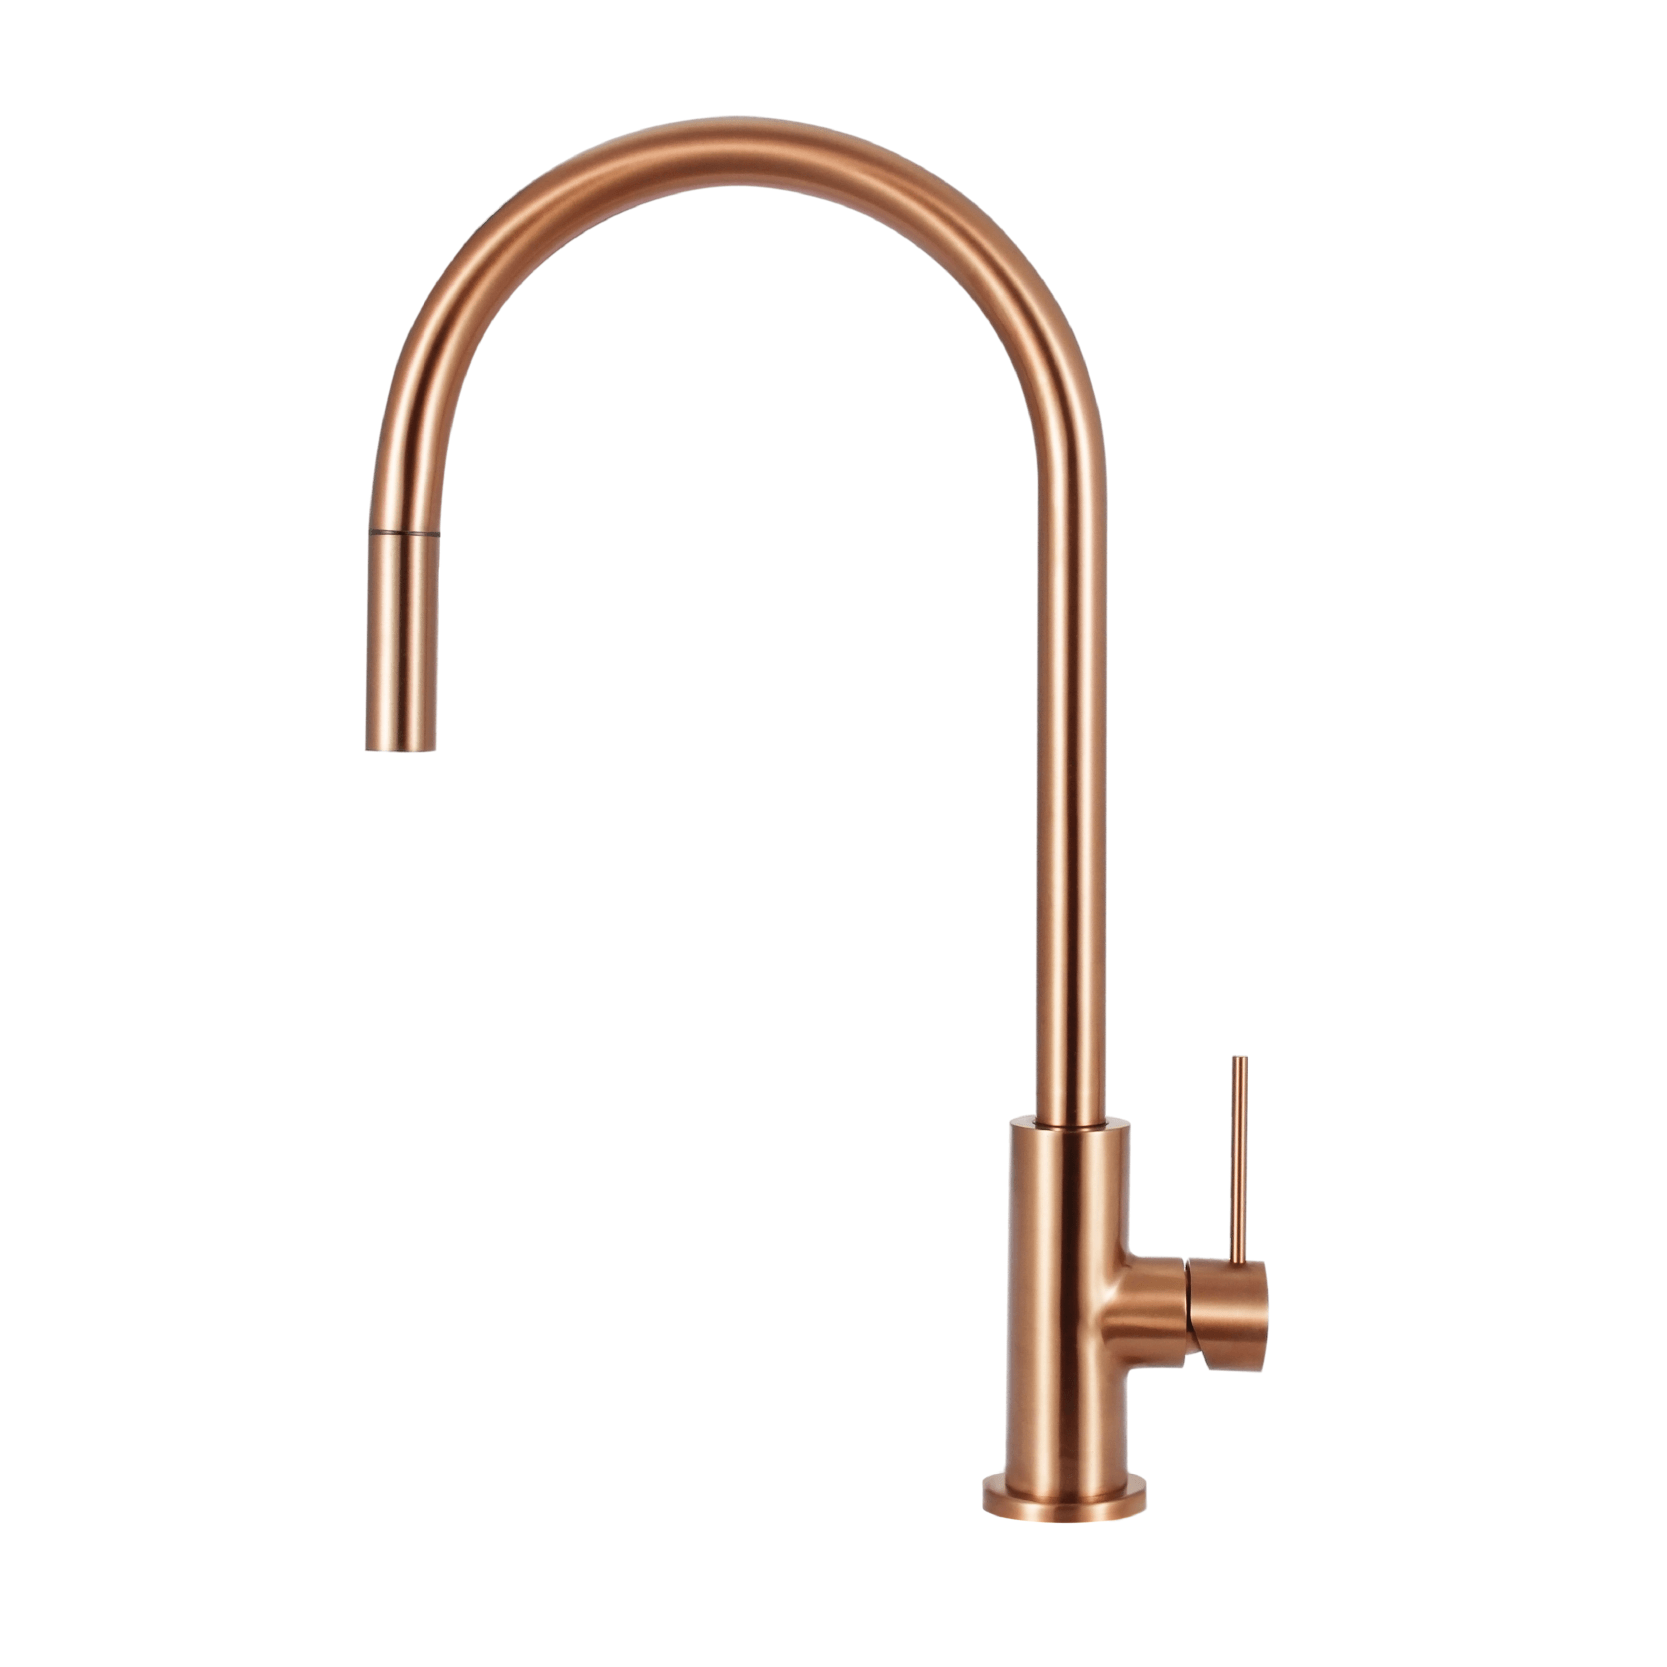 Bexley Ultra Slim Pull Out Kitchen Mixer Copper